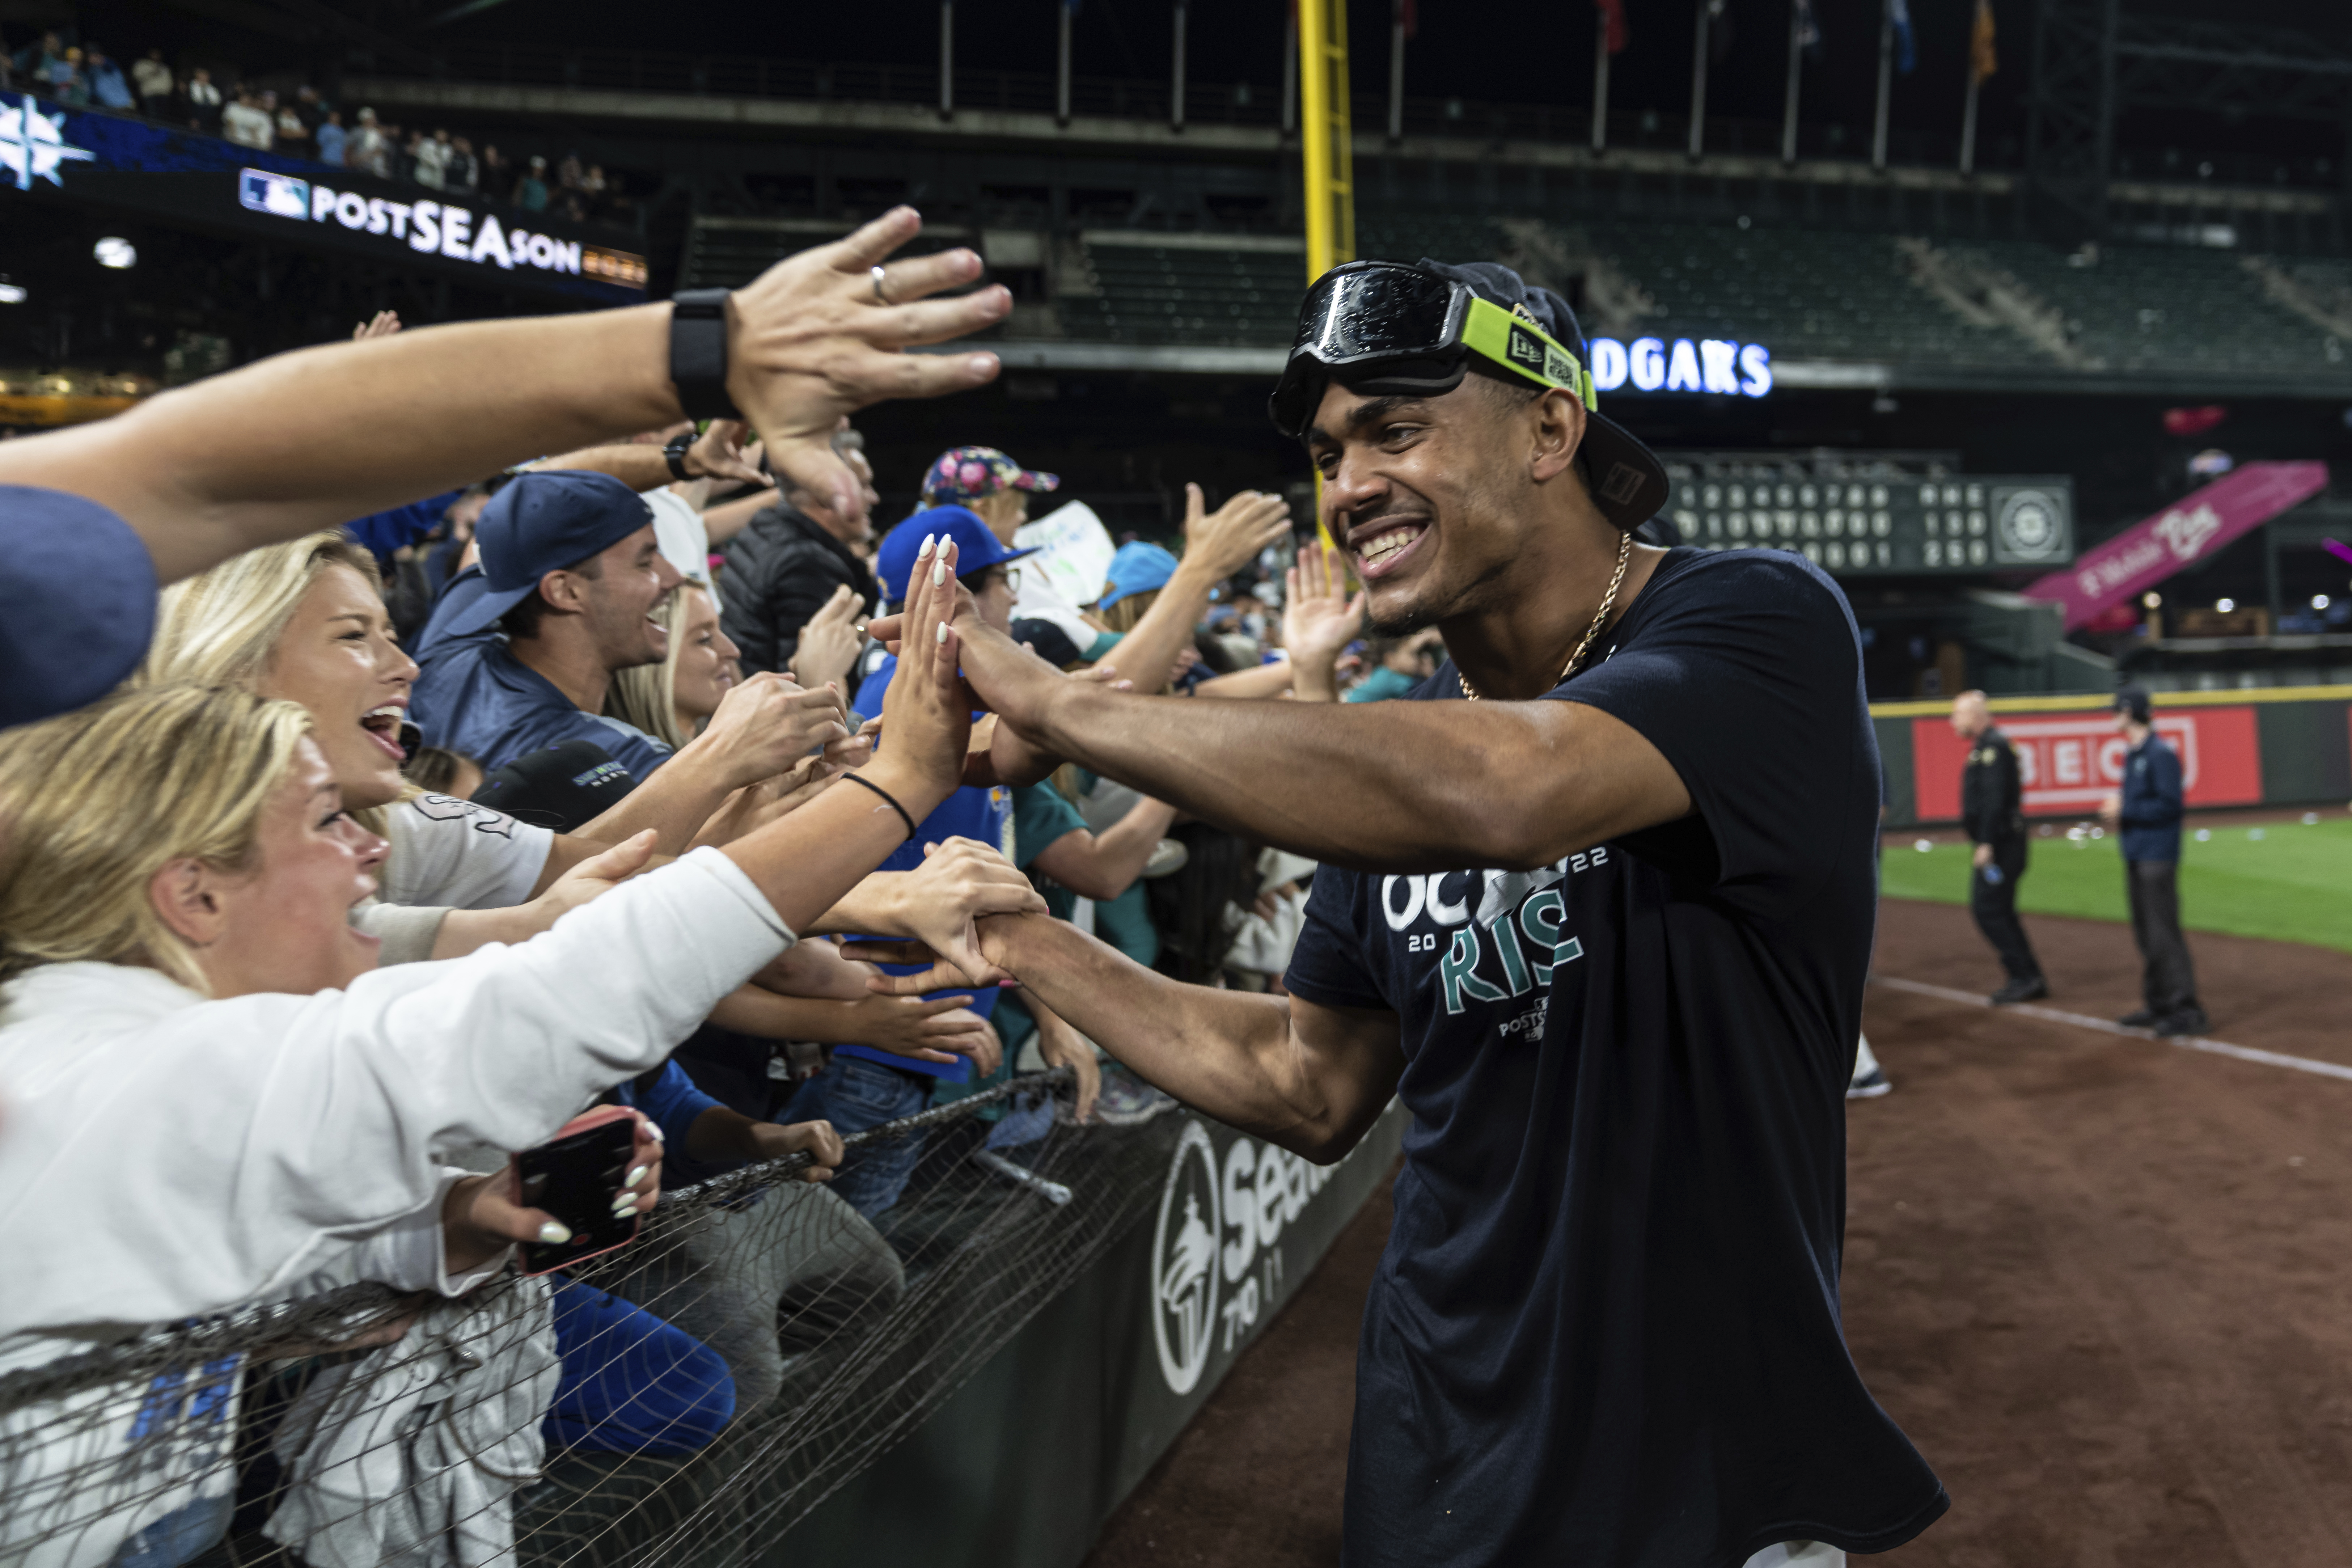 Social media celebrates Mariners ending 21-year playoff drought